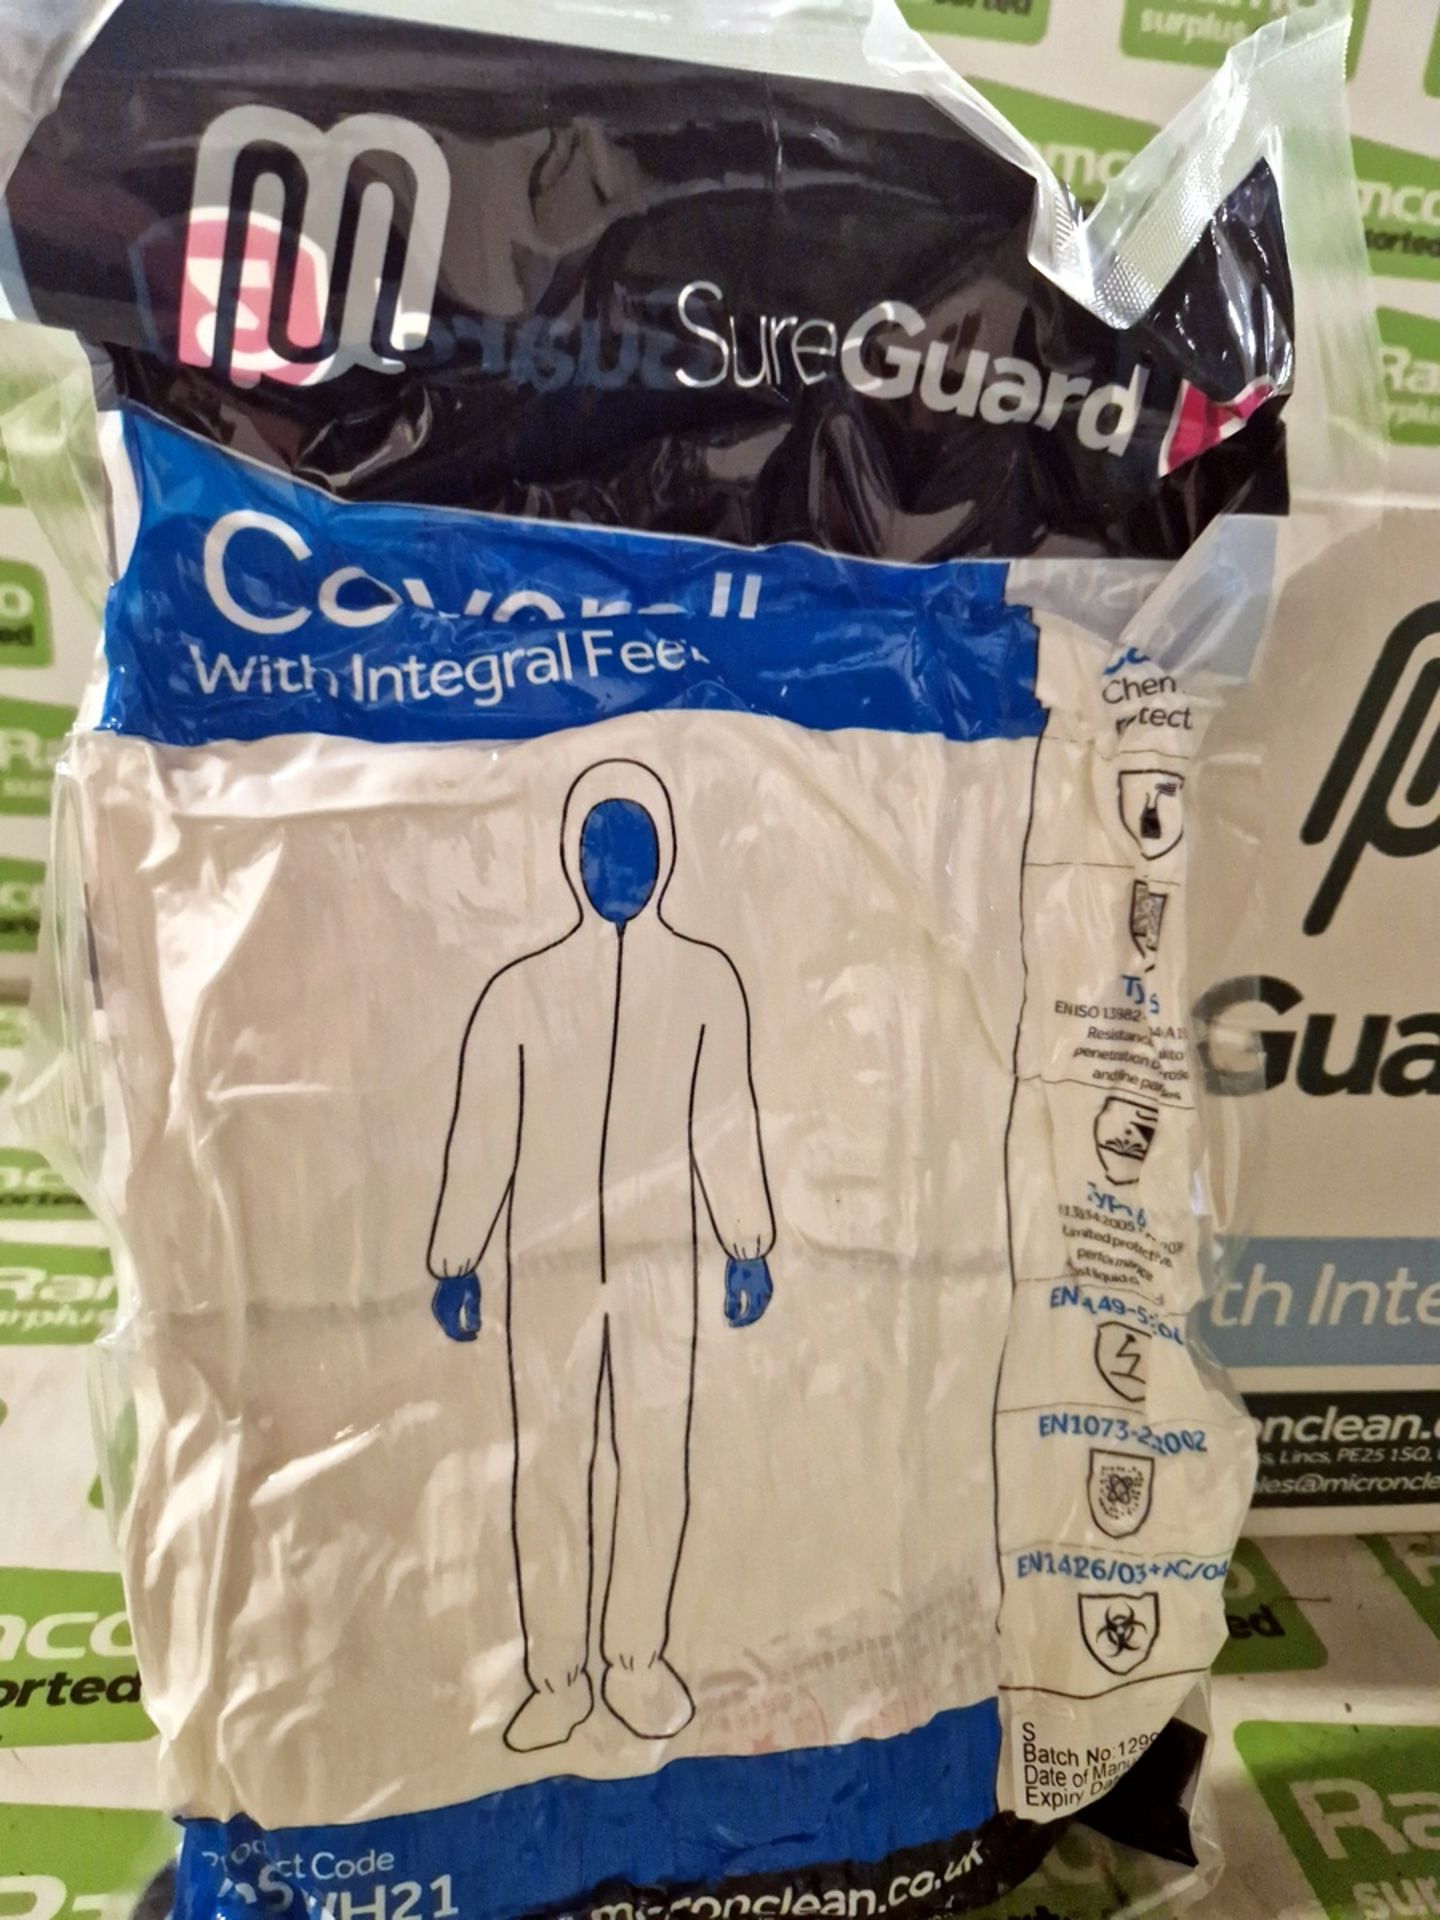 2x boxes of MicroClean SureGuard 3 coveralls with integral feet - size small - 25 units per box - Image 3 of 4